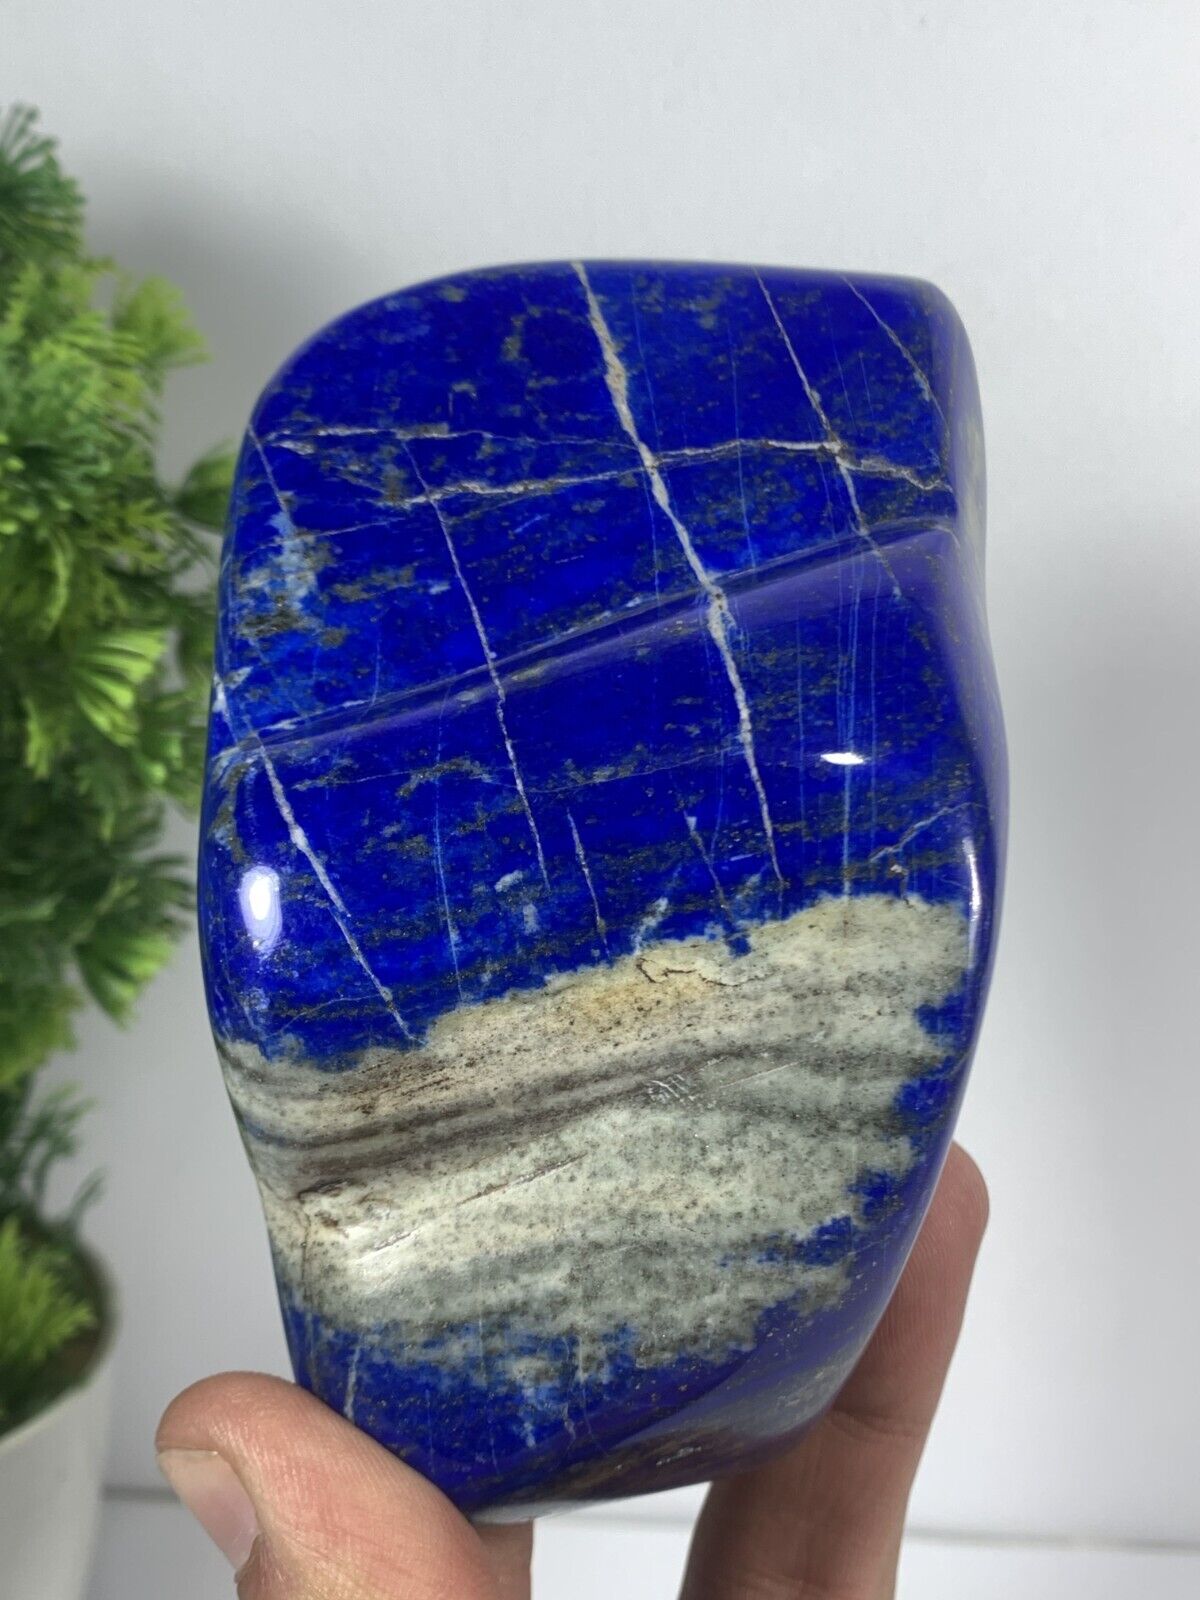 574Gram Lapis Lazuli Freeform Rough Tumbled Polished AAA+ Grade From Afghanistan